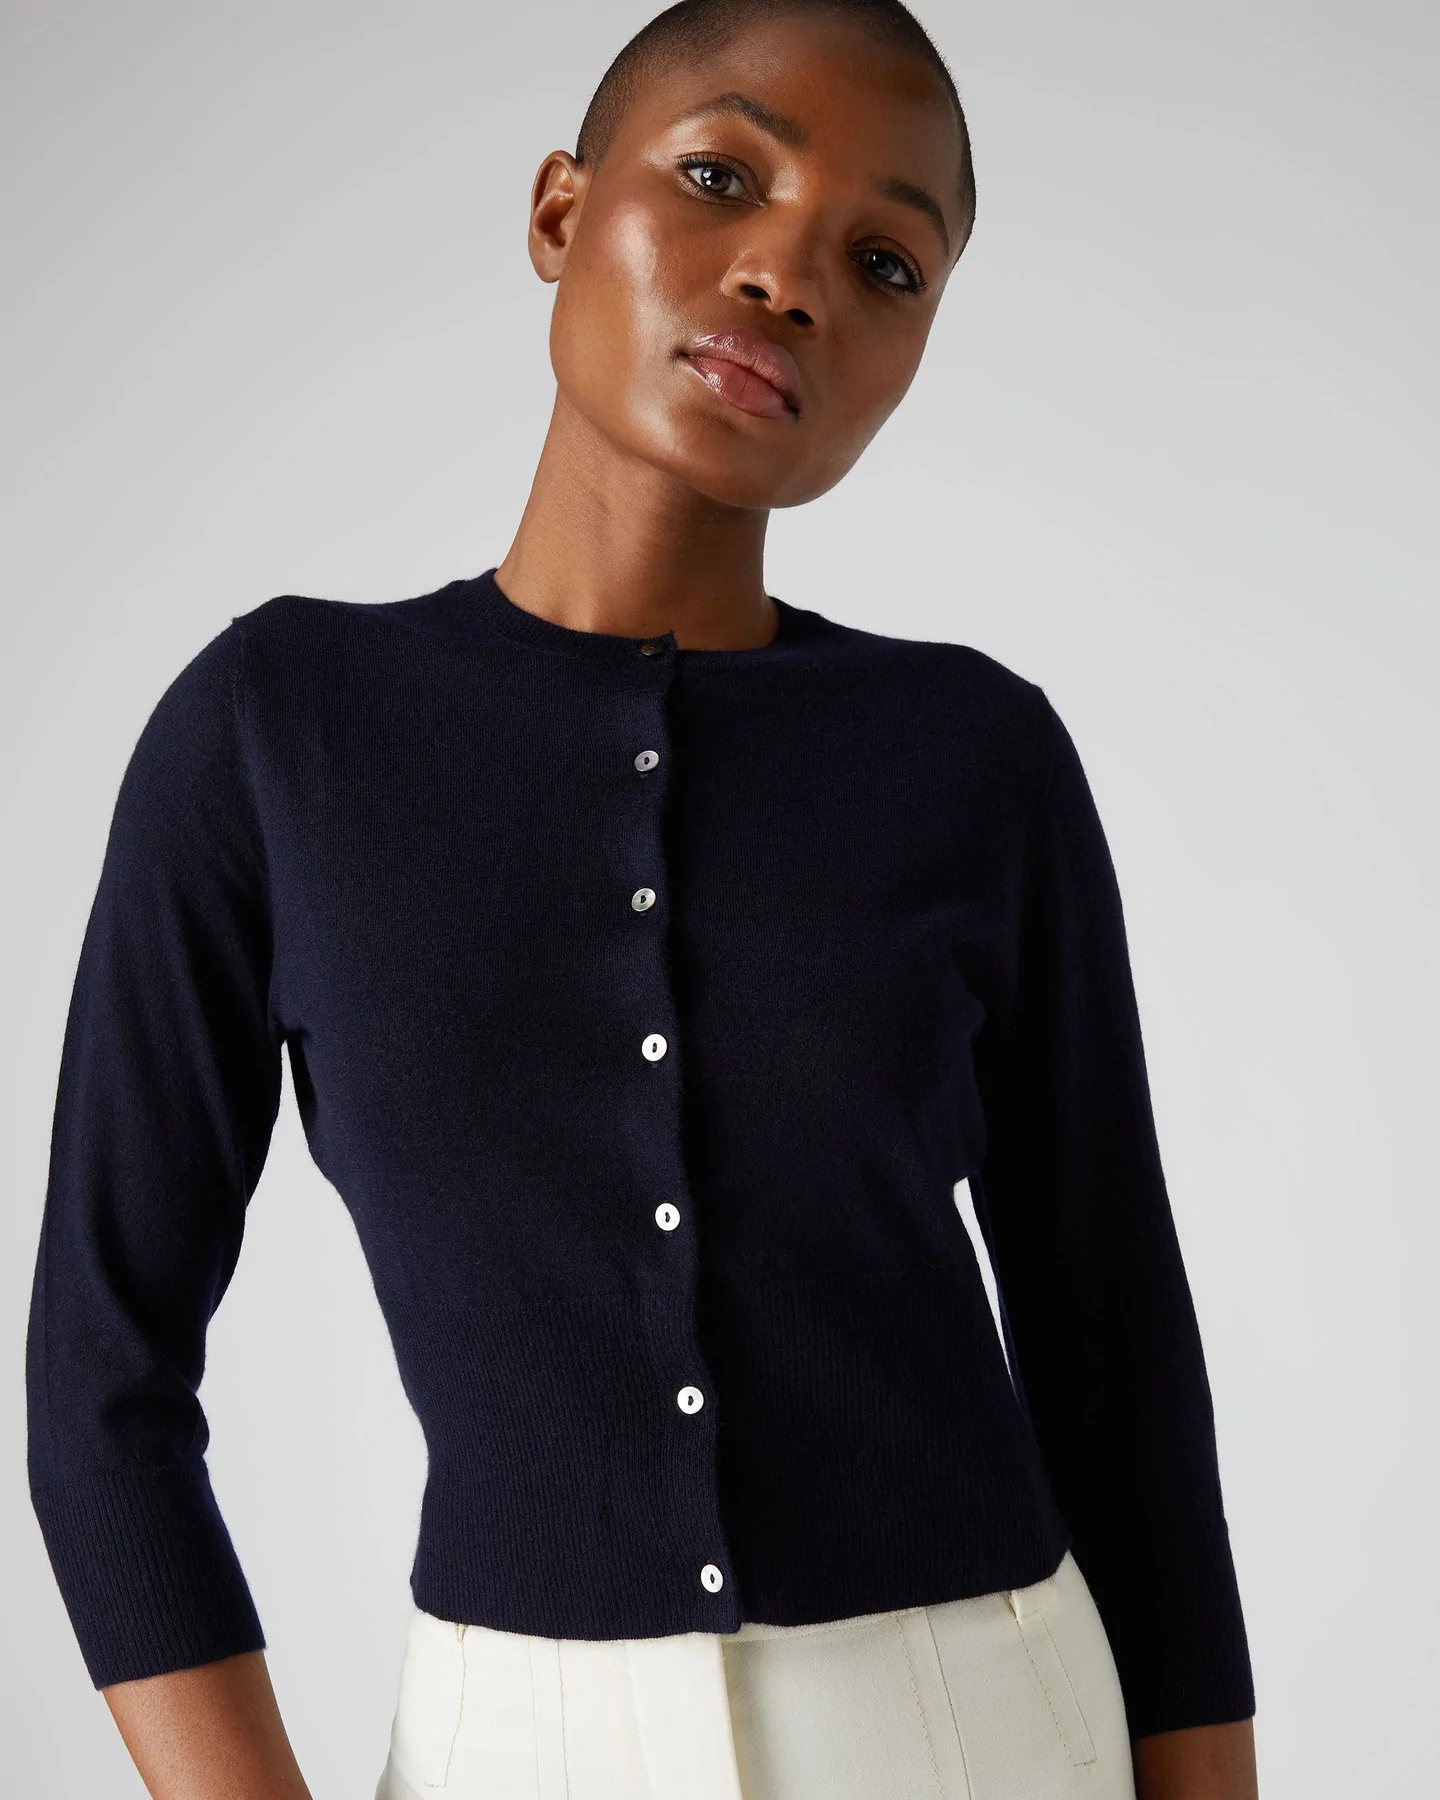 Cropped Cashmere Cardigans - Buy and Slay